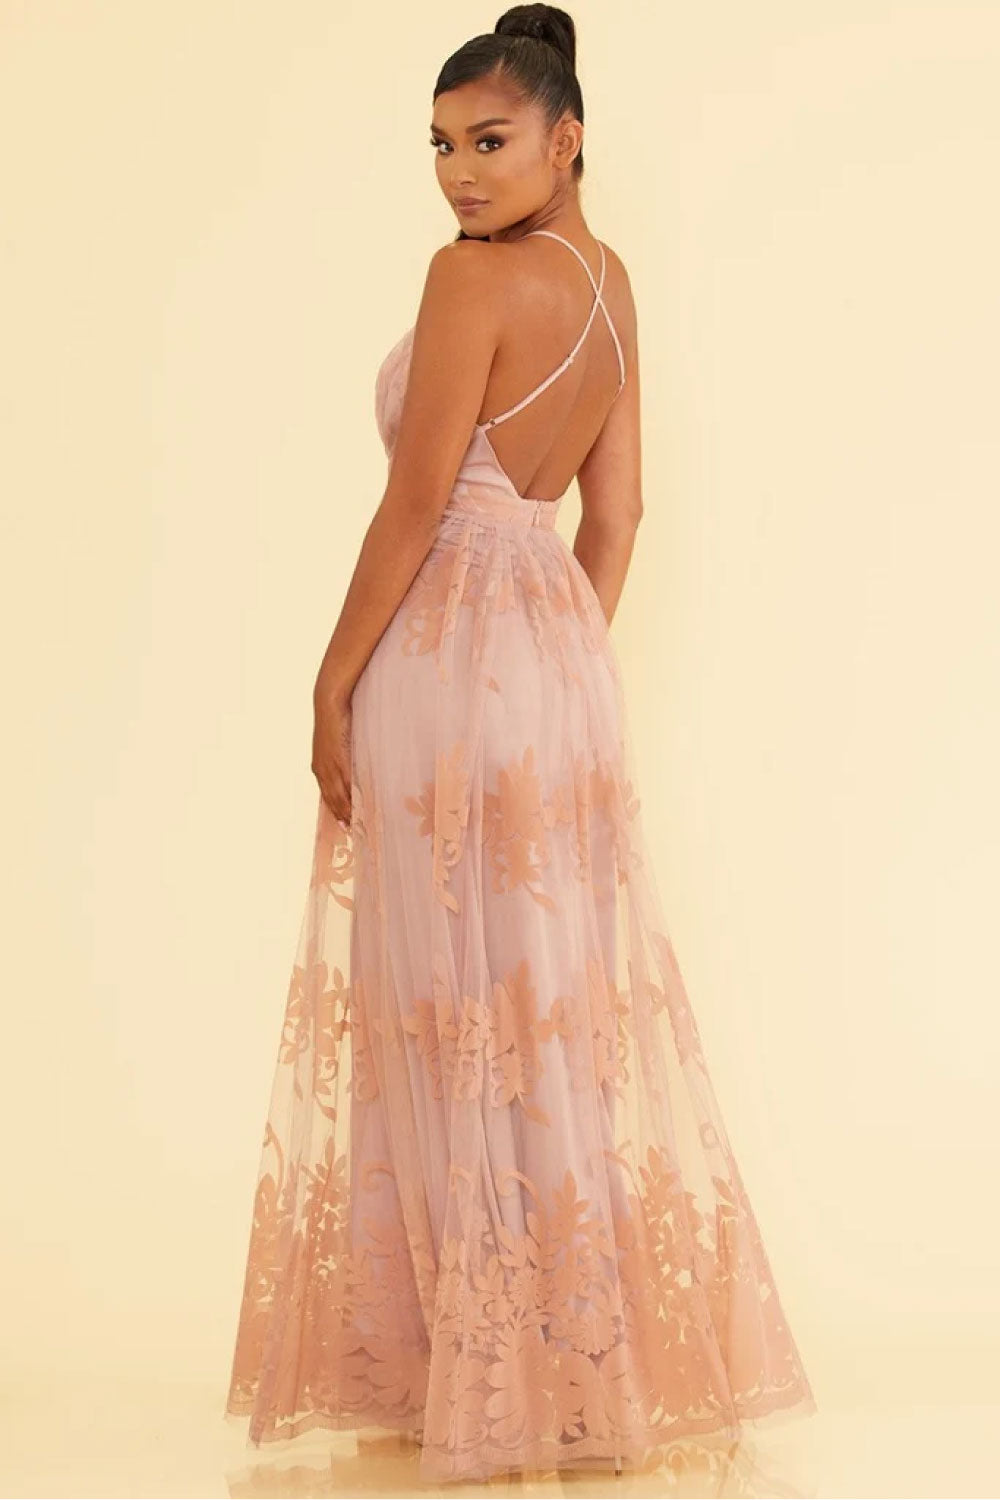 Image of the back of Luxxel's Elegant Lace Gown in Blush on a model.